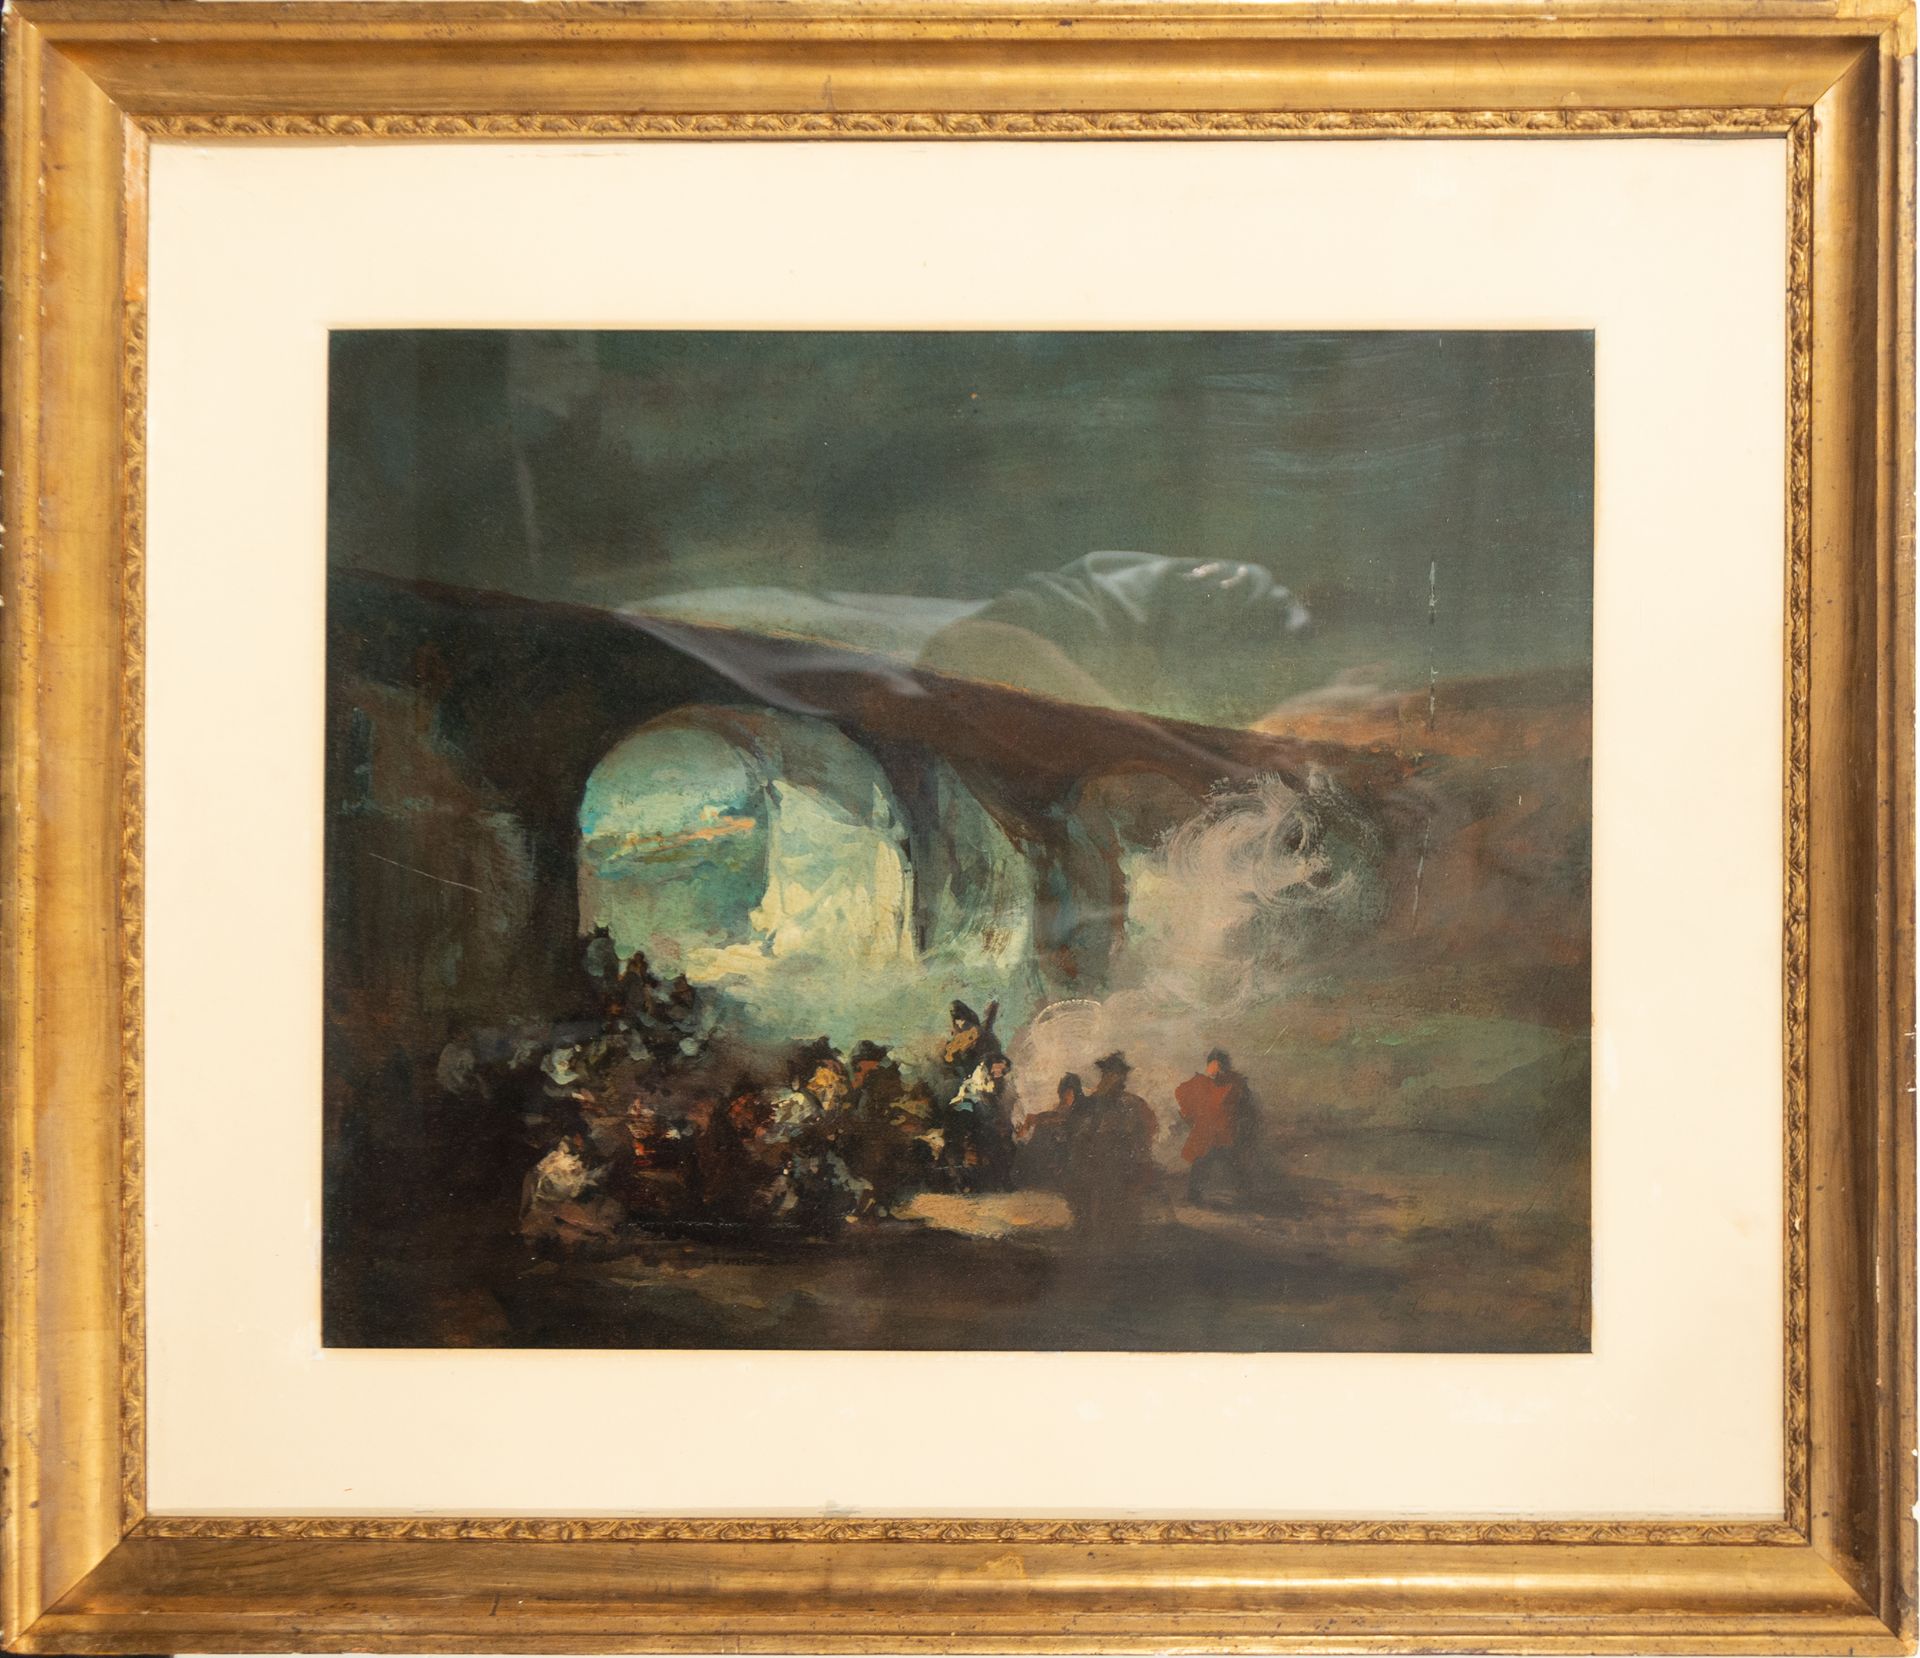 Bandits in the Cave, signed and certified Eugenio Lucas Vilaamil, 1861, 19th century Spanish school - Bild 2 aus 10